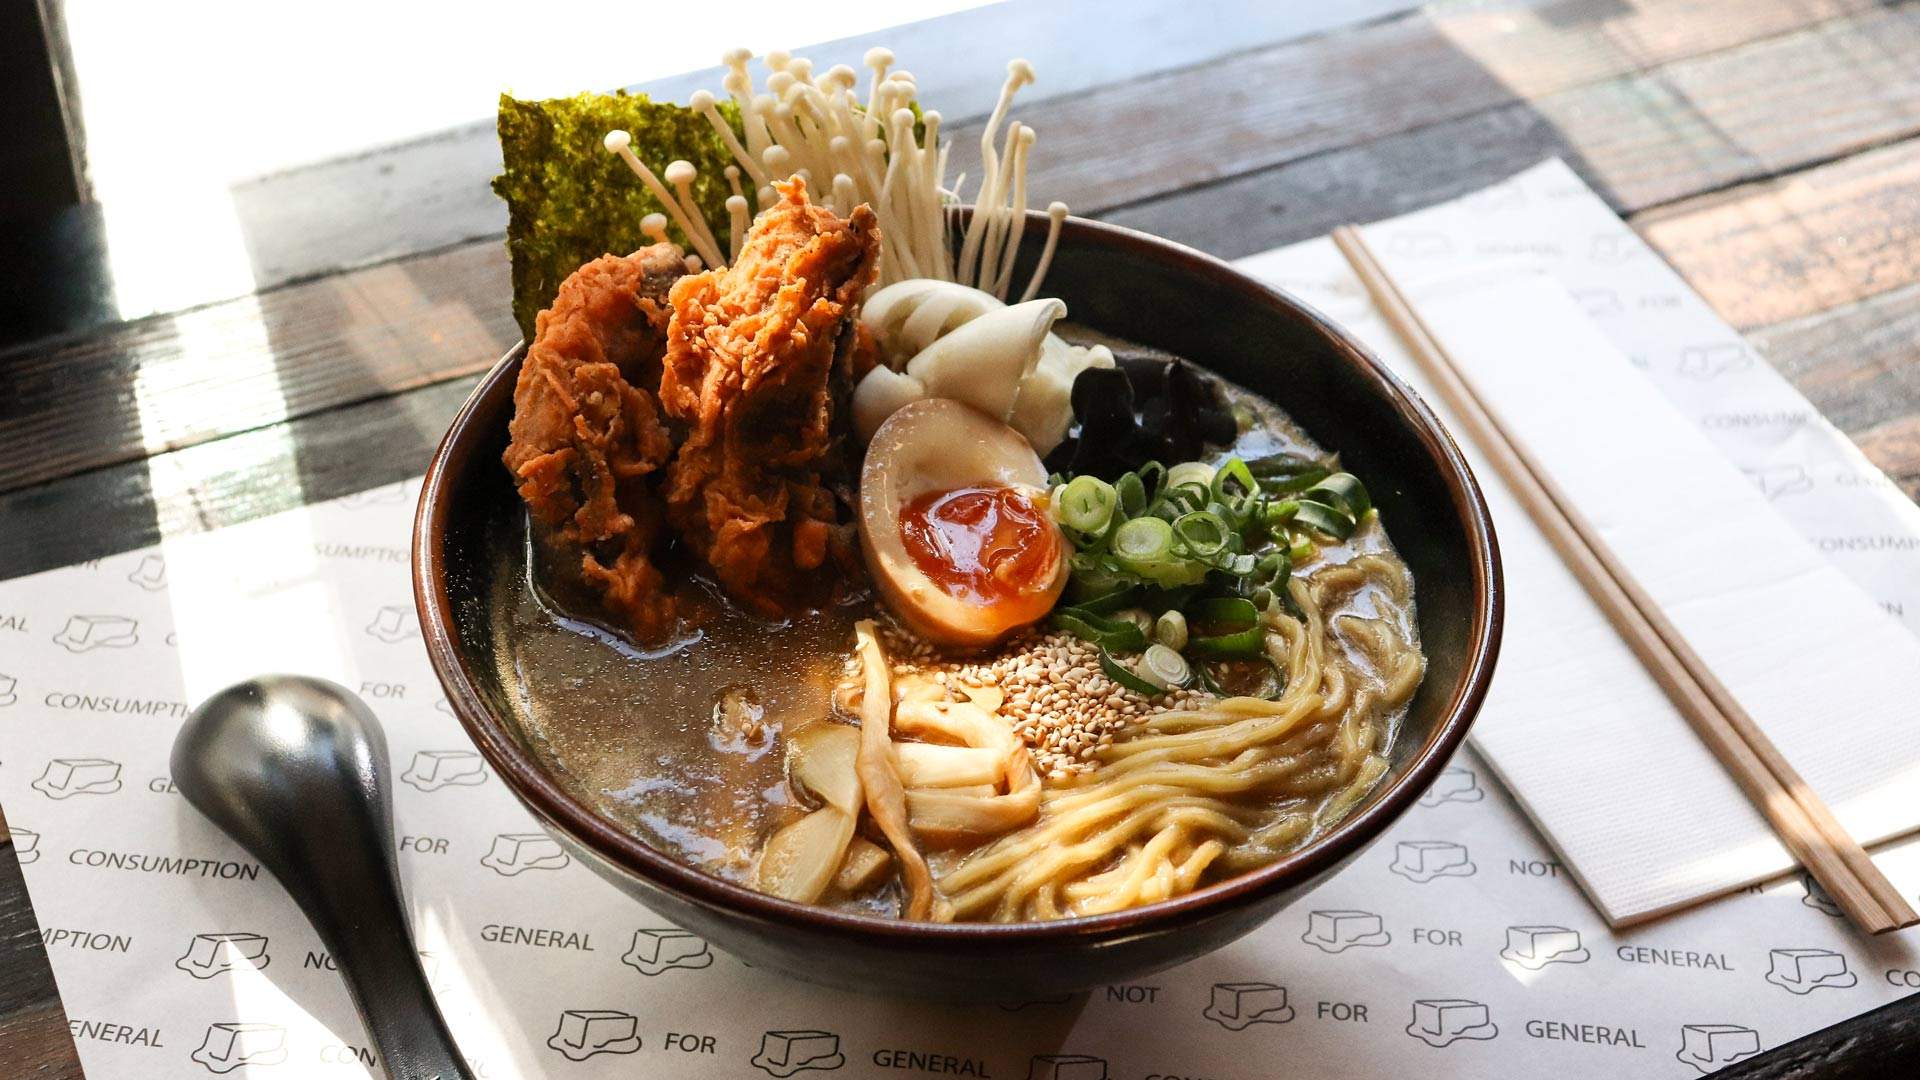 Sydney's Butter Is Serving Up a Killer Vegetarian Ramen for the Rest of the Month